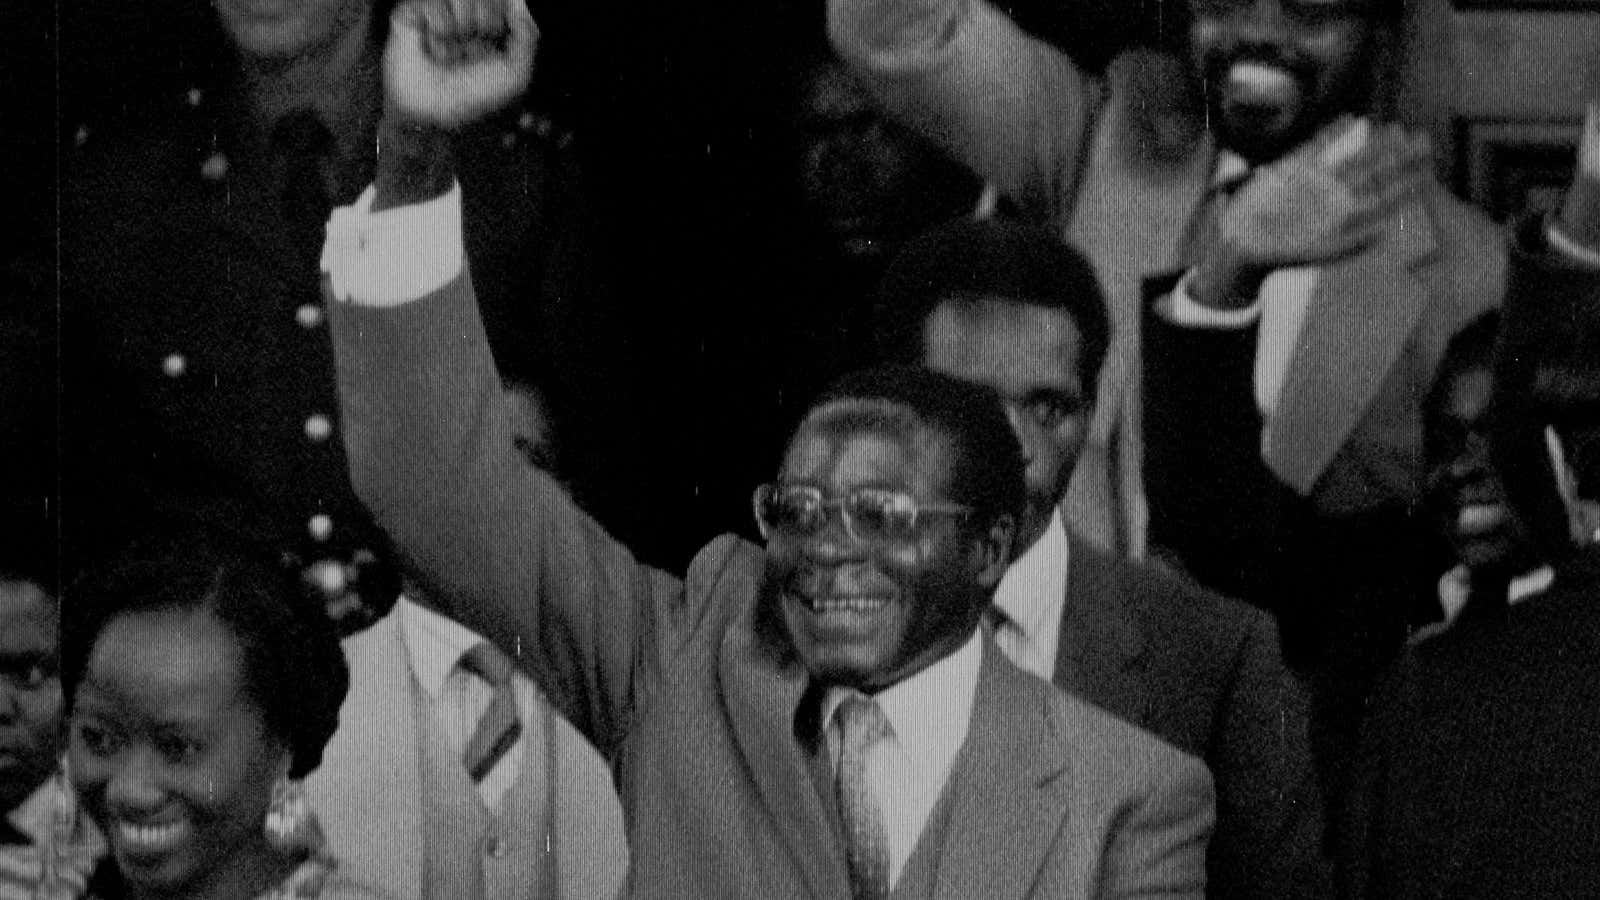 Zimbabwean Premier Robert Mugabe gives a triumphant salute as he emerges from parliament following its official opening, May 14, 1980.  At right is Mugabe’s wife Sally.